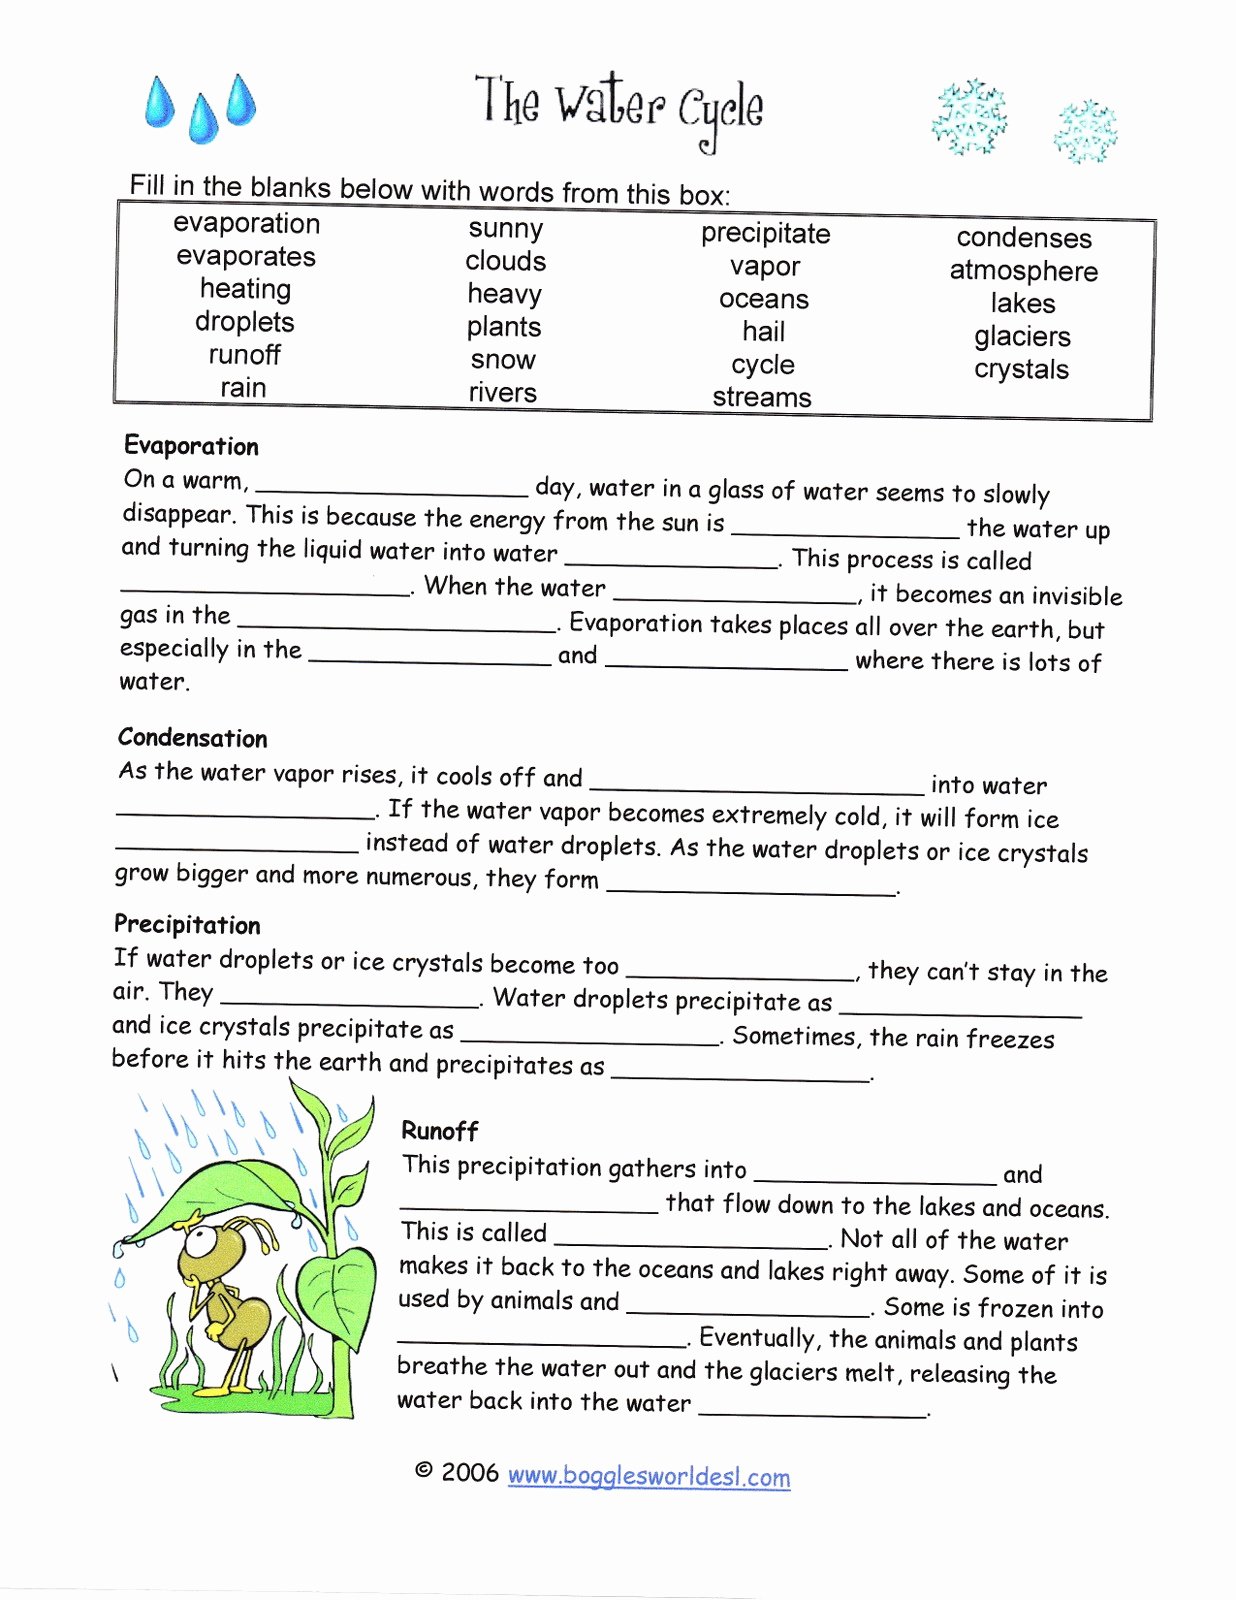 Water Cycle Worksheet Answer Key Lovely Dr Gayden S Sixth Grade Science Class October 2010